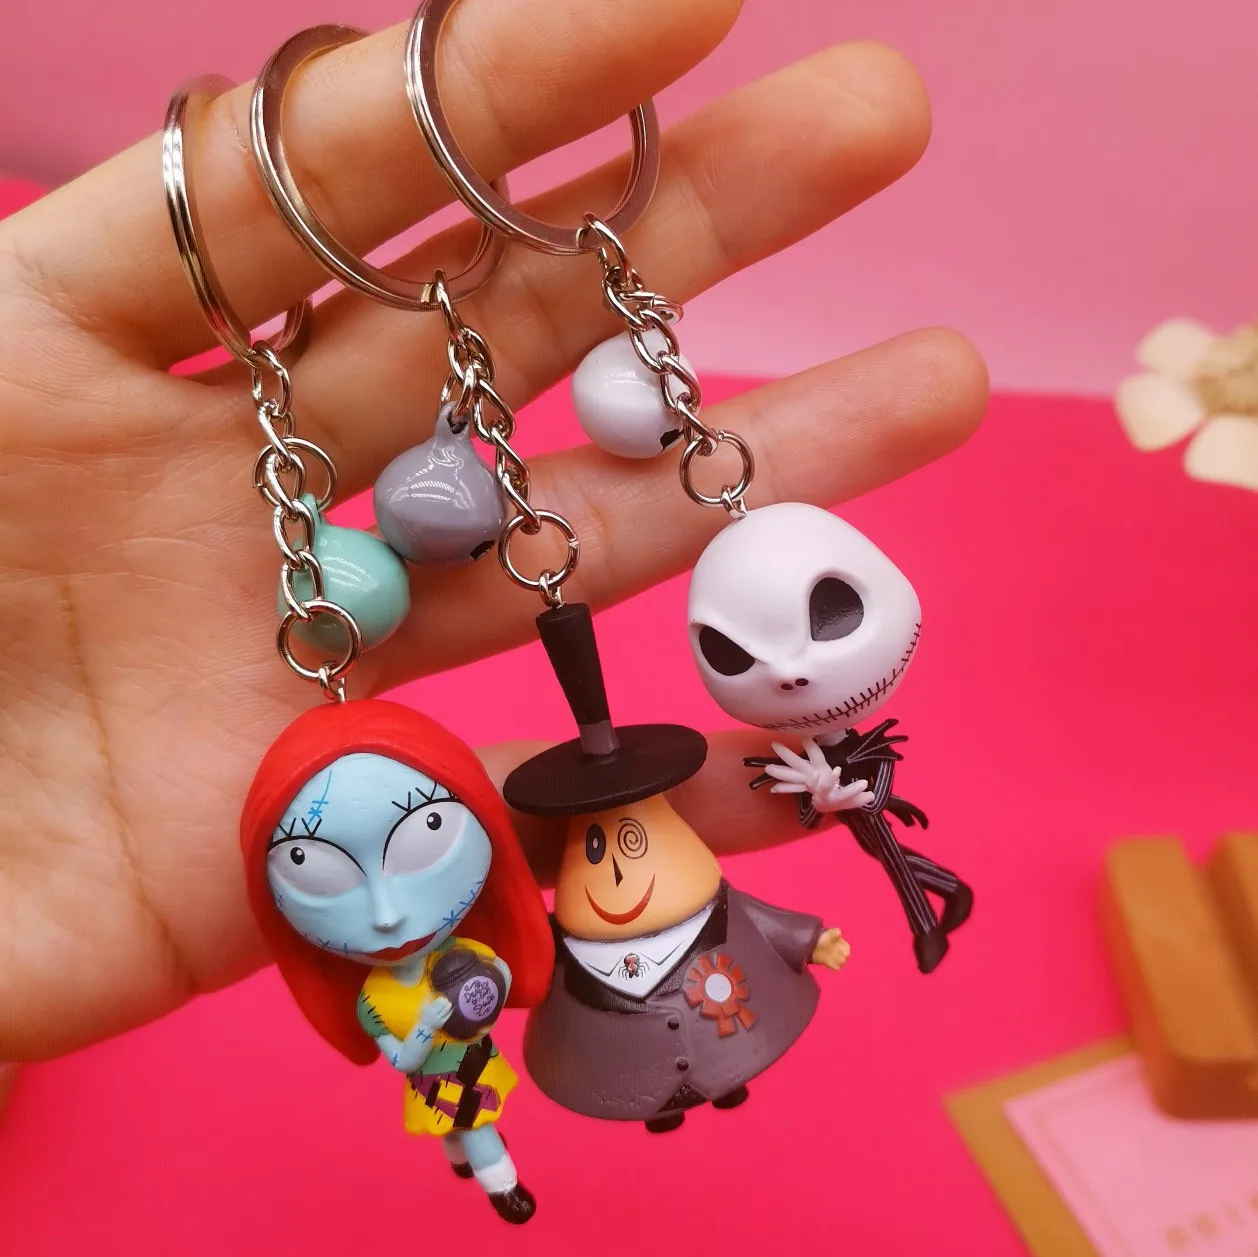 (New Arrival)Hot selling High Quality 10pcs/set PVC The Nightmare Before Christmas Jack Anime Action Figure keychain For Gift